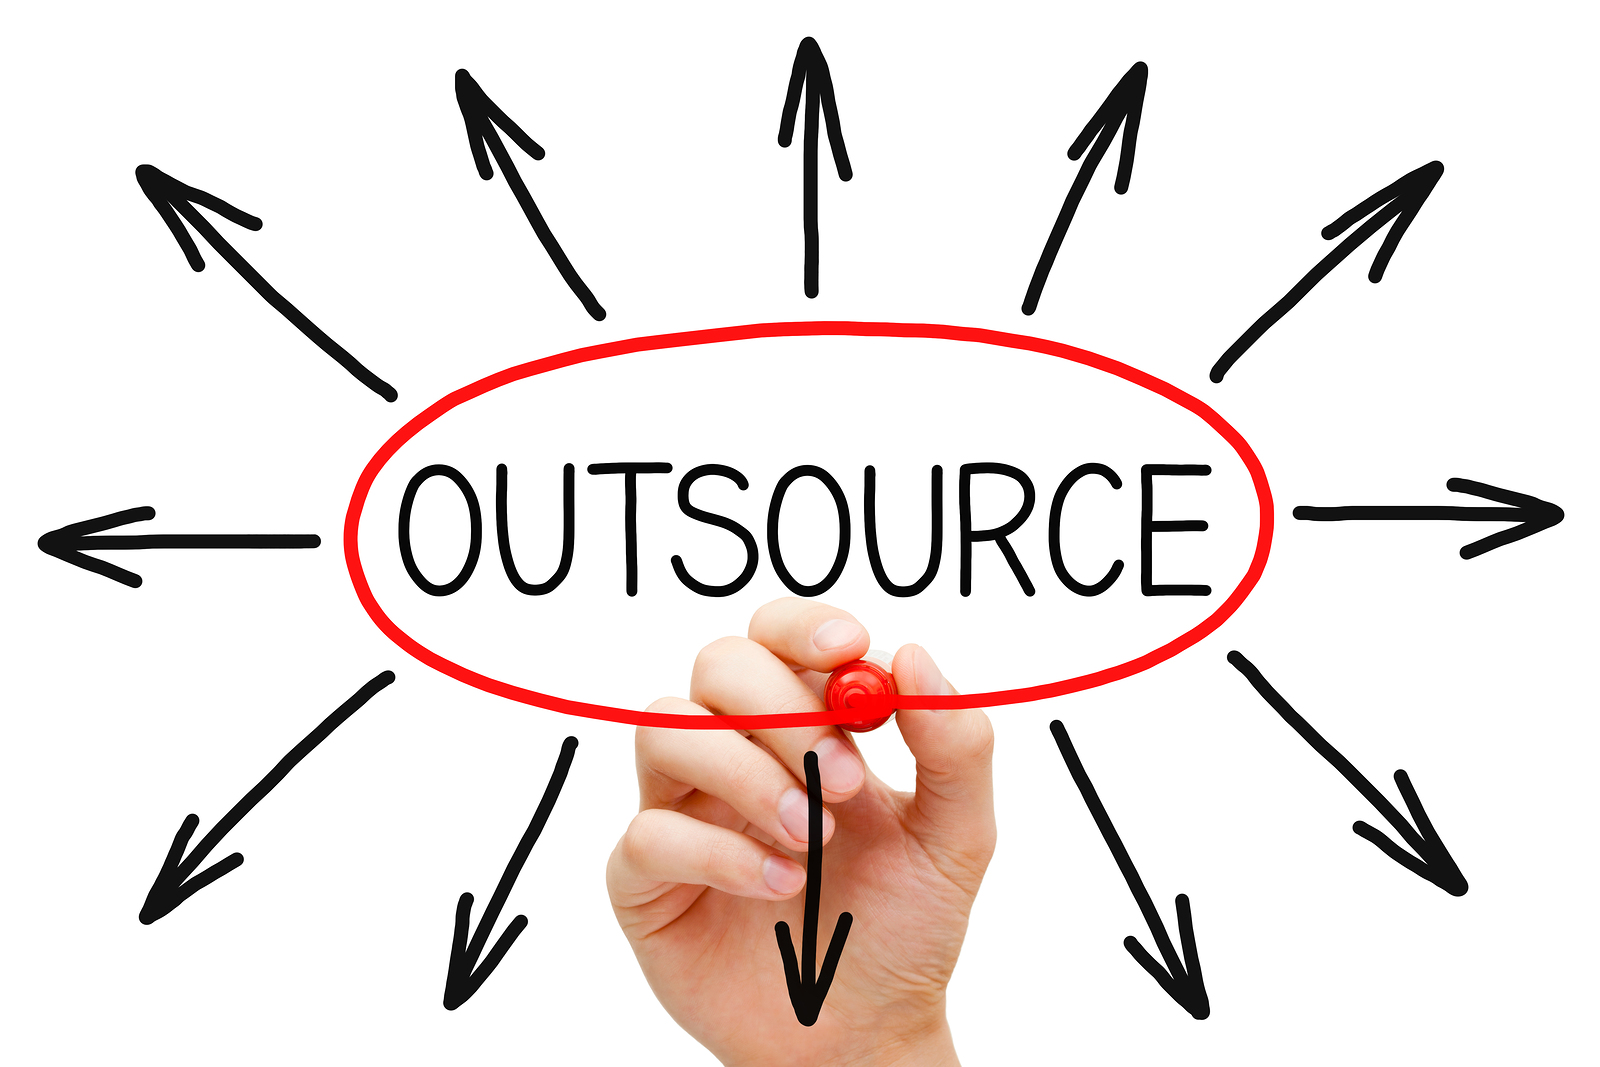 If it’s not your core competency Outsource it